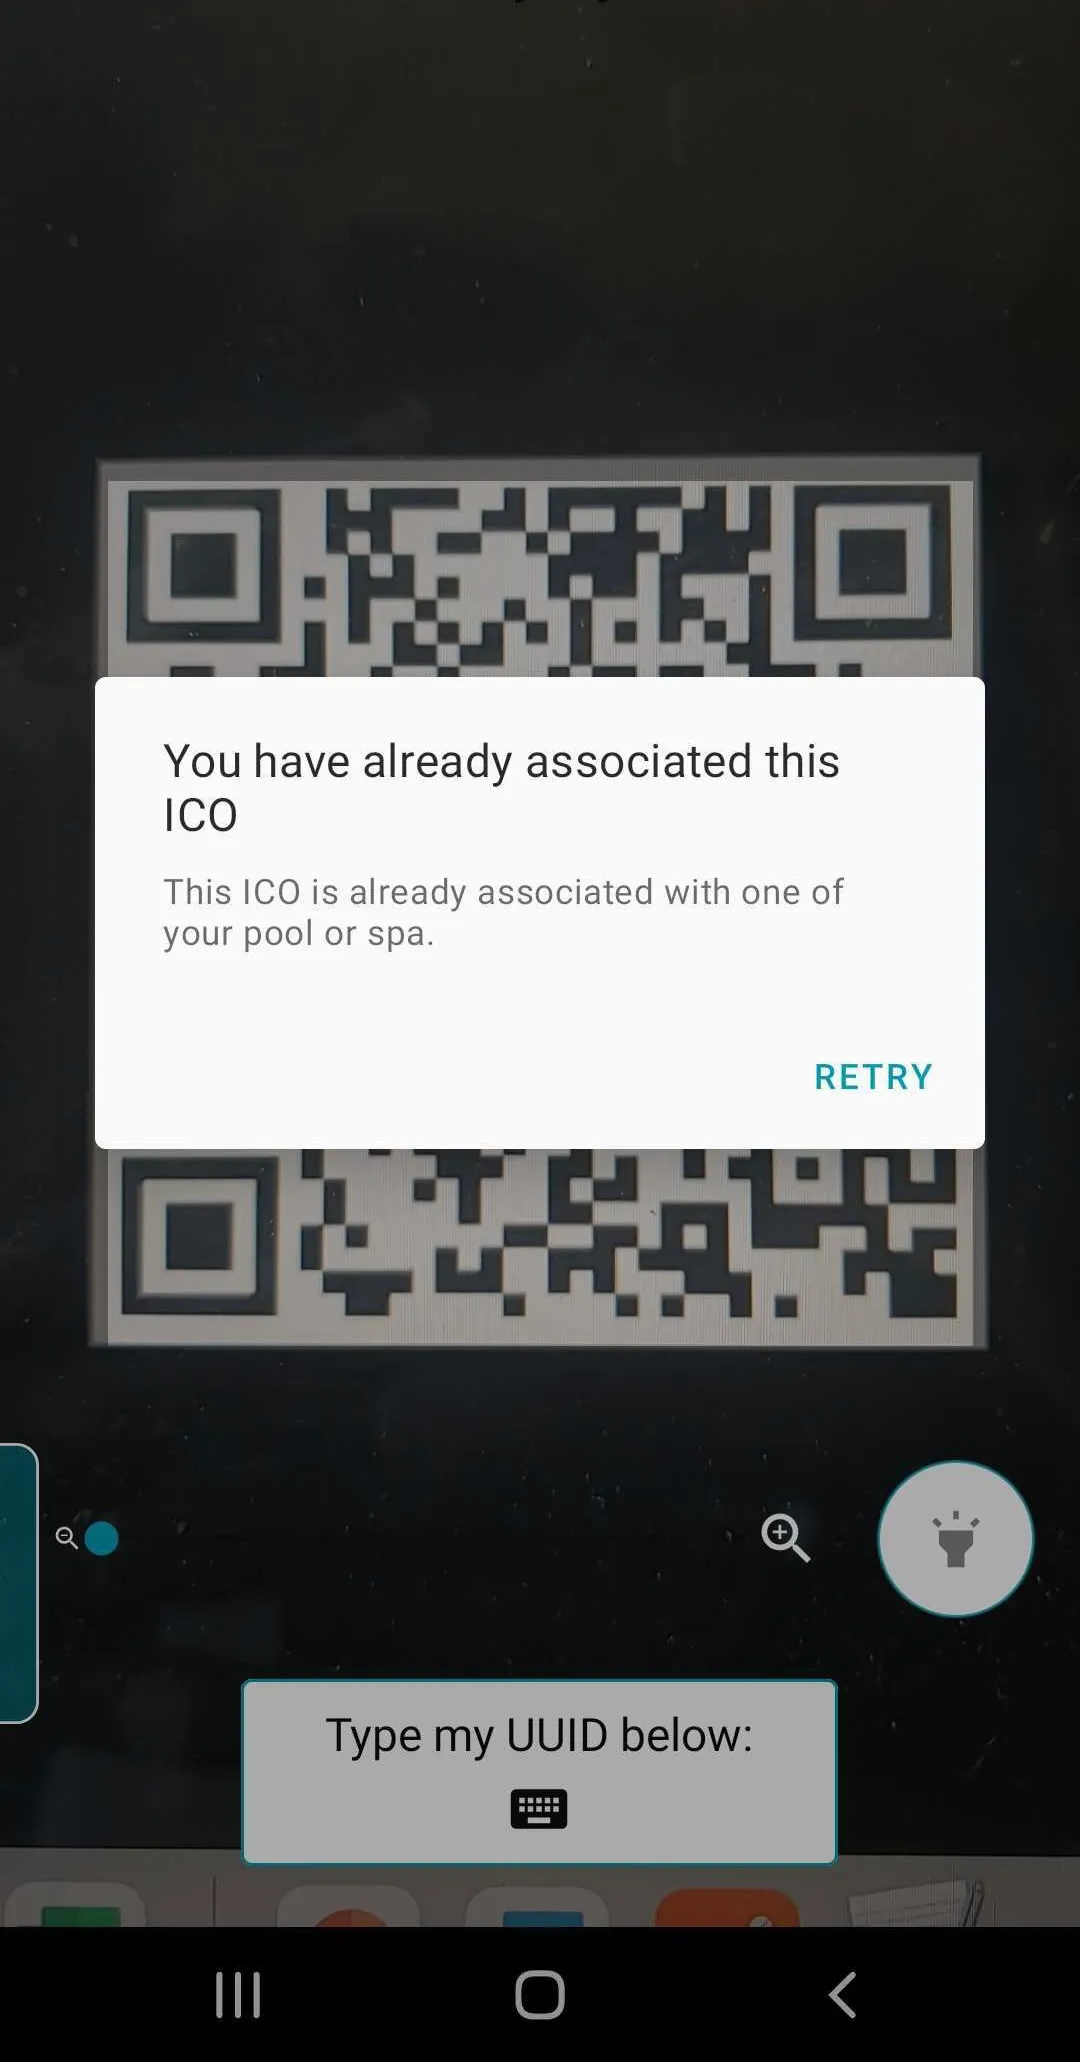 Photo showing the error message "ICO is already associated"